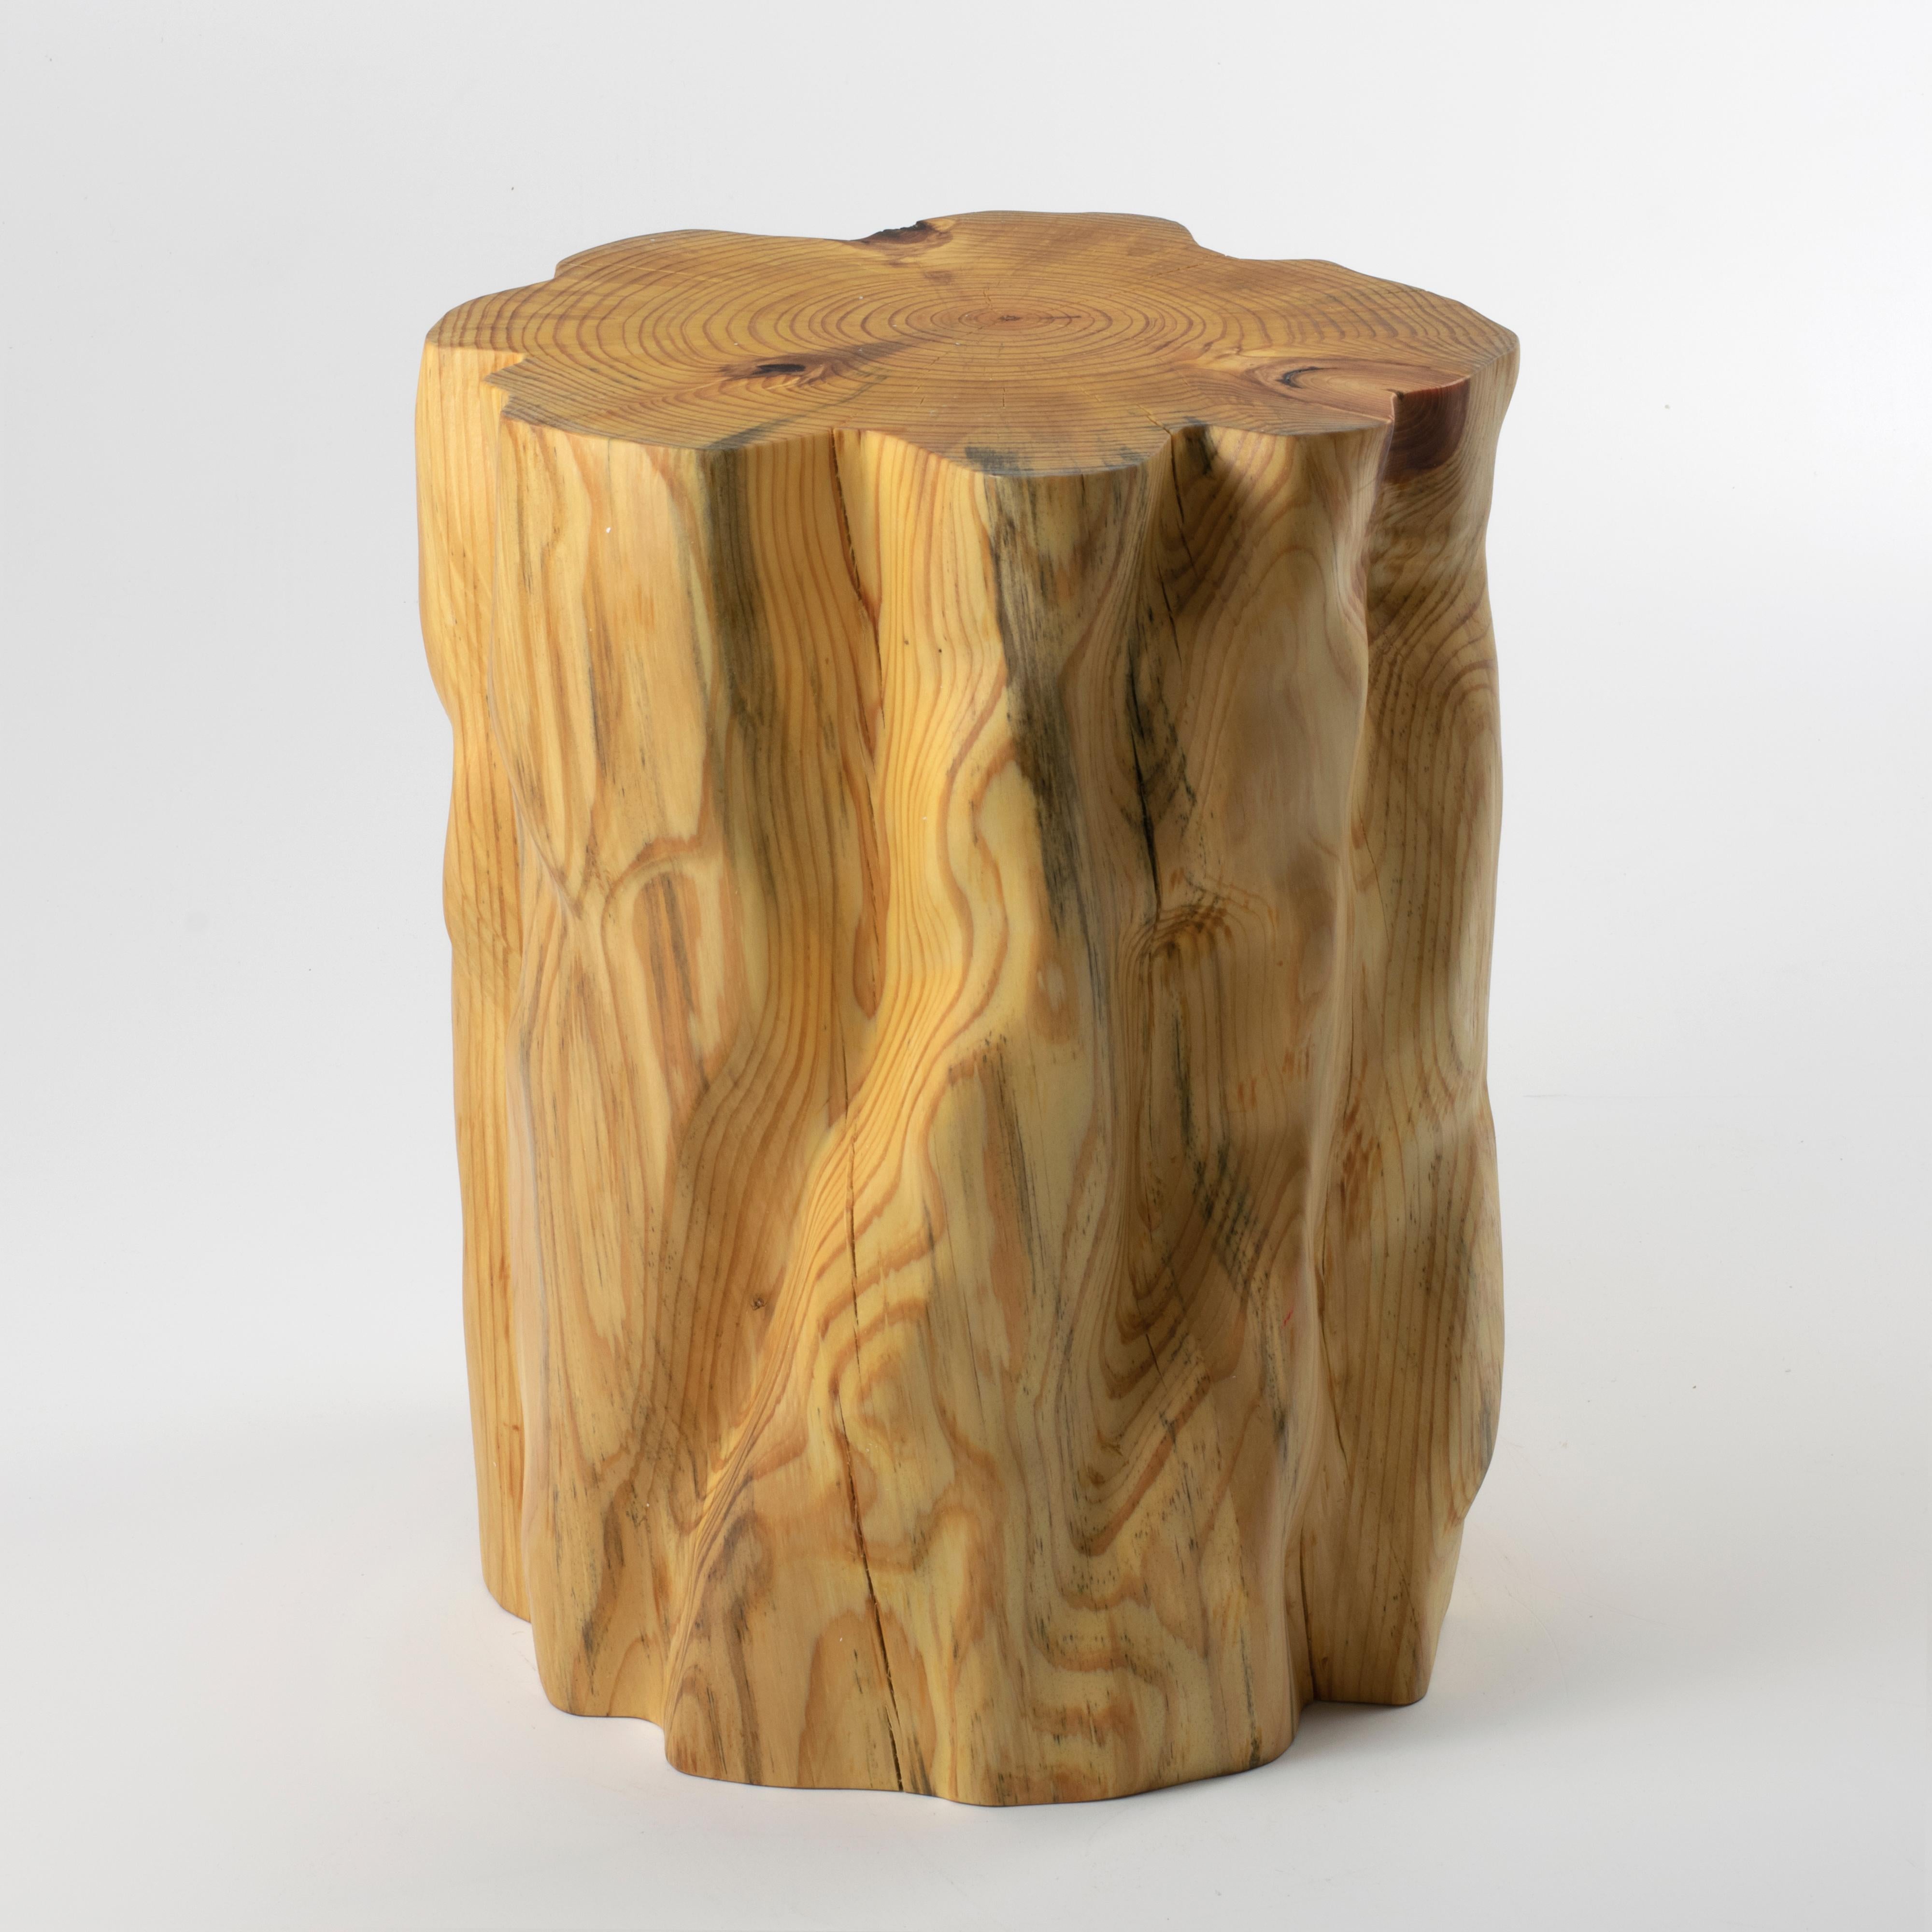 Machine-Made Bark Scale Stool, Set of 3 by Timbur, Represented by Tuleste Factory For Sale